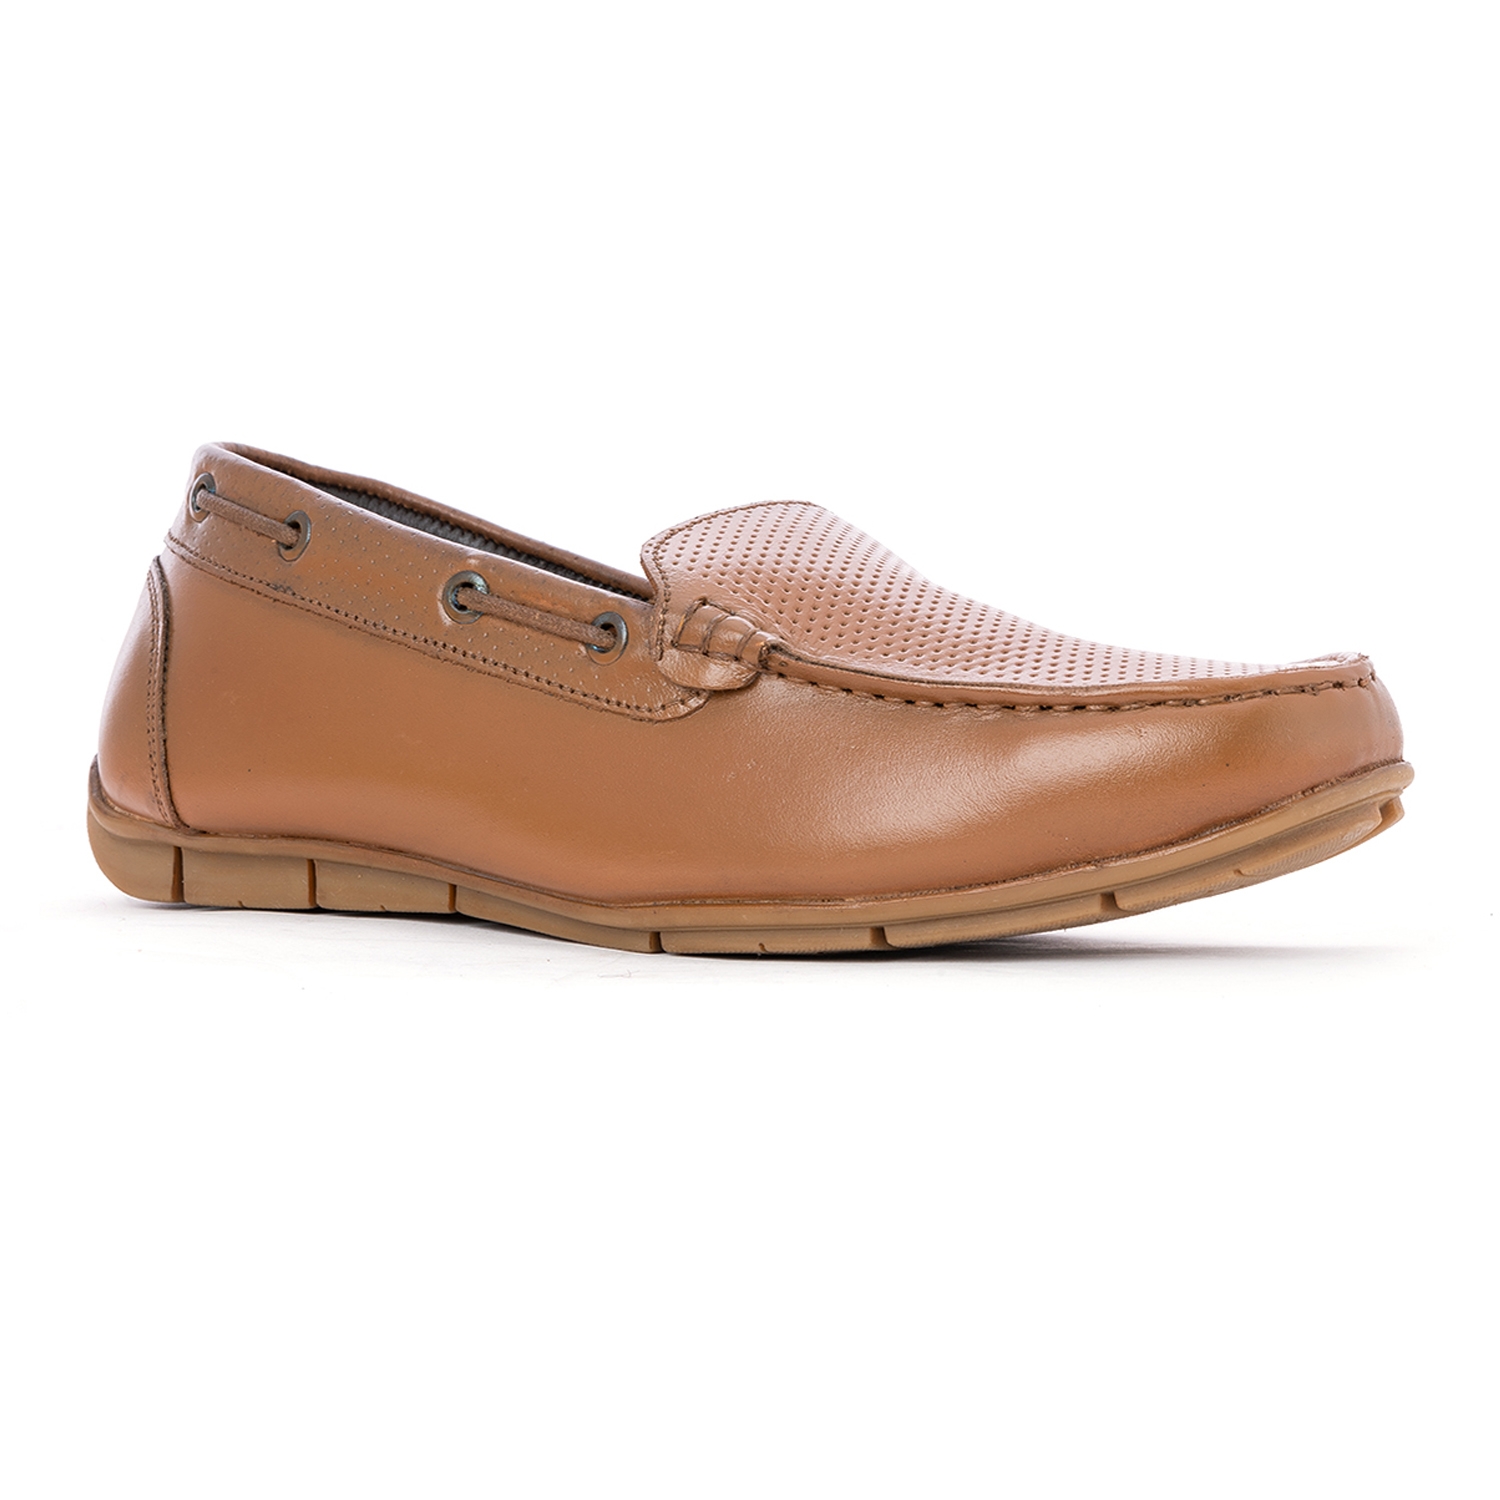 Khadim | Khadim's Brown Colour Loafers / Casual Shoe having Leather Upper Material - Daily Wear Use for Women ( Size : 3 )